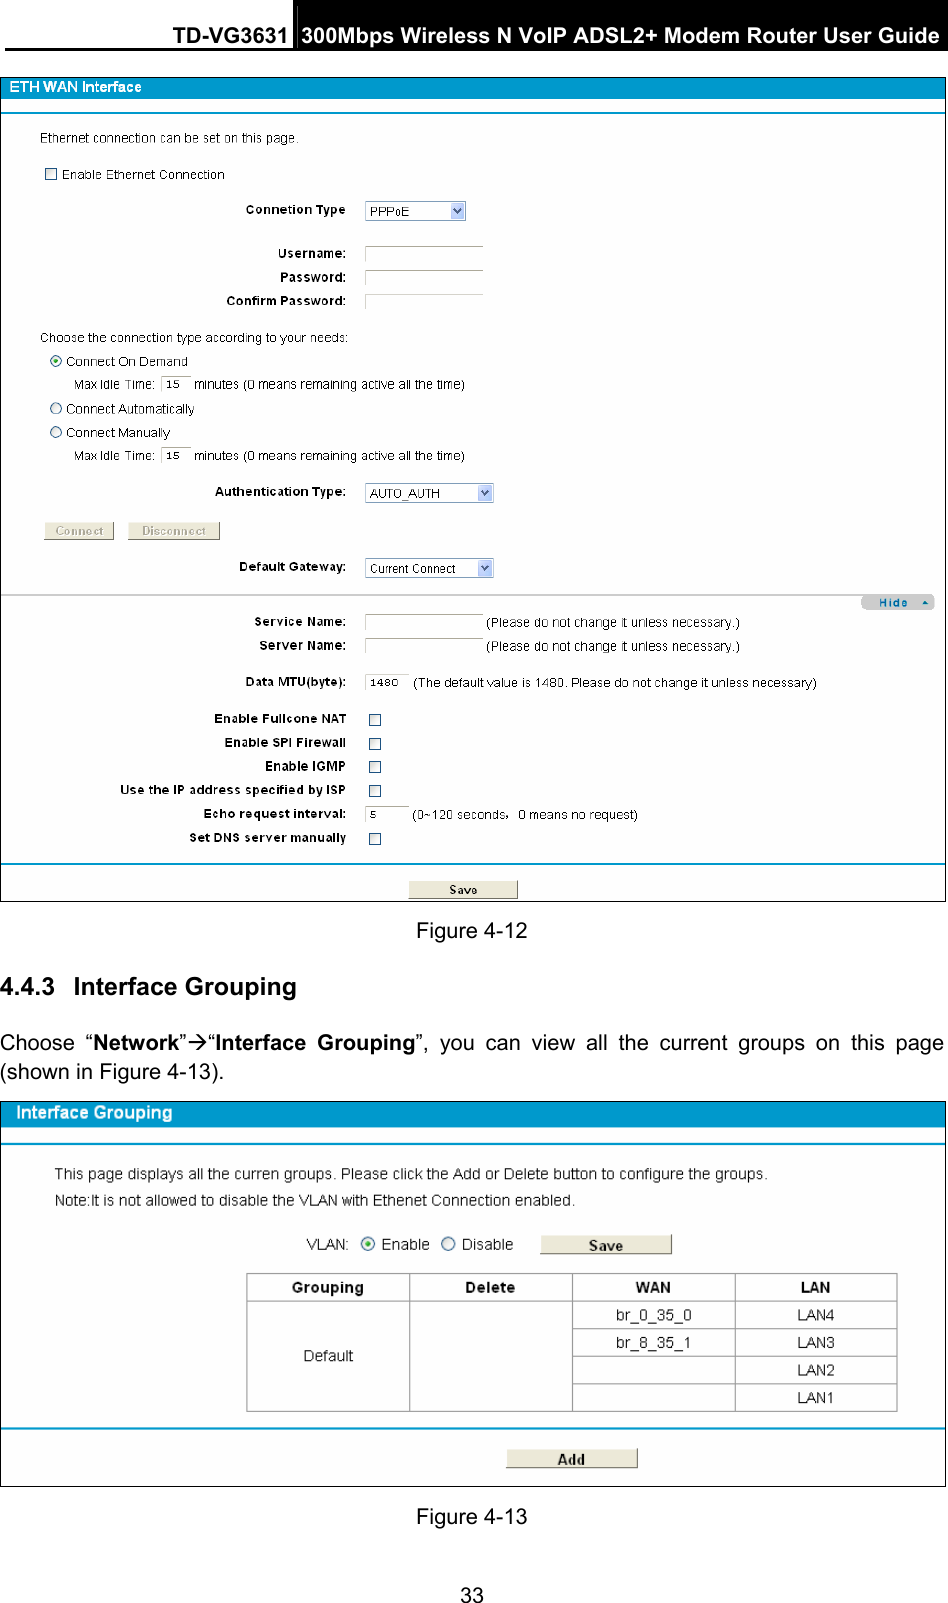 TD-VG3631 300Mbps Wireless N VoIP ADSL2+ Modem Router User Guide 33  Figure 4-12 4.4.3  Interface Grouping Choose “Network”“Interface Grouping”, you can view all the current groups on this page (shown in Figure 4-13).   Figure 4-13 